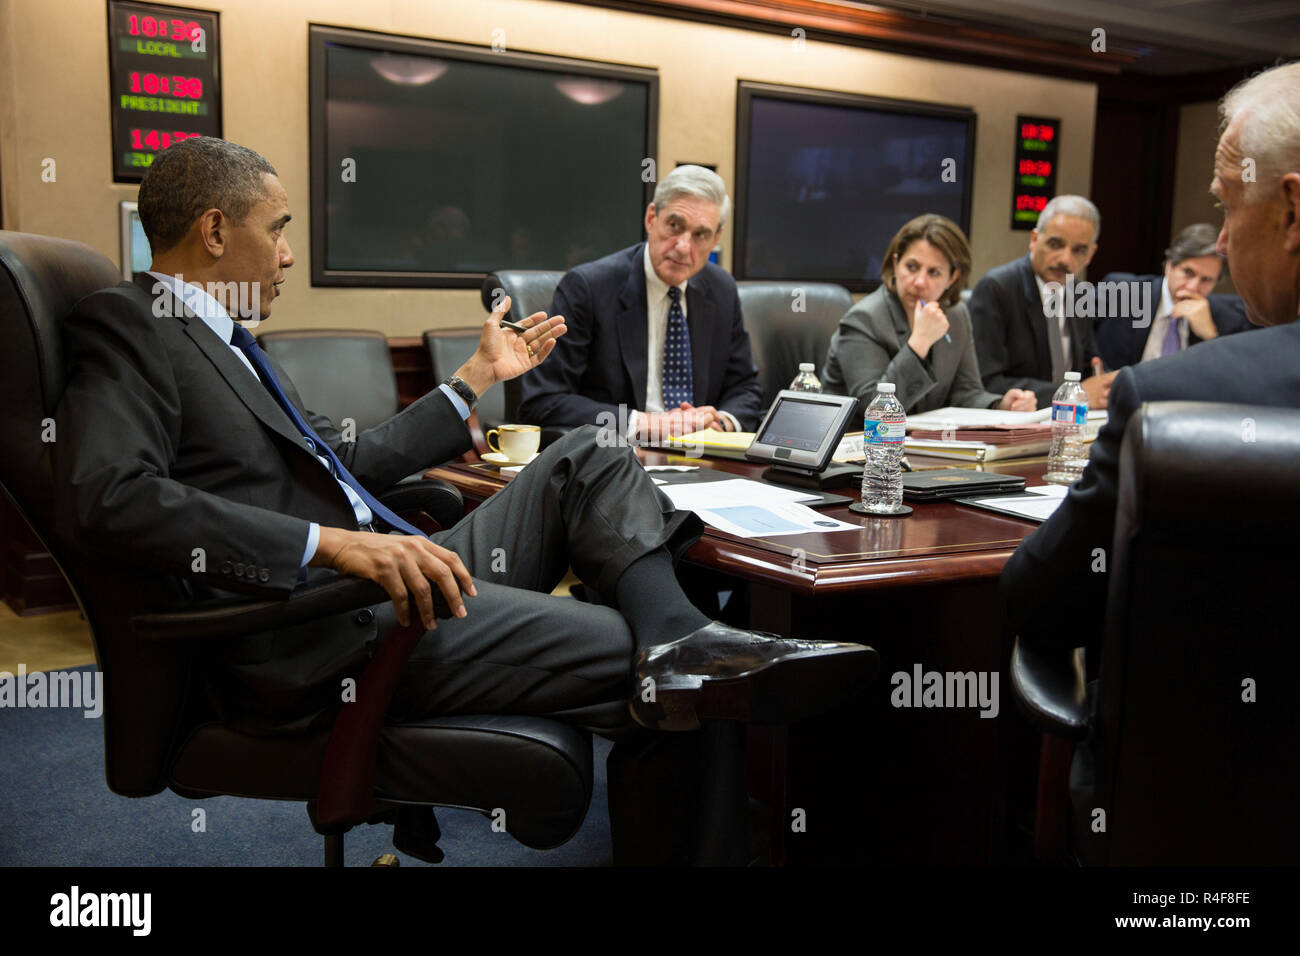 President Barack Obama meets with members of his national security team to discuss developments in the Boston bombings investigation, in the Situation Room of the White House, April 19, 2013. Pictured, from left, are: FBI Director Robert Mueller; Lisa Monaco, Assistant to the President for Homeland Security and Counterterrorism; Attorney General Eric Holder; Deputy National Security Advisor Tony Blinken; and Vice President Joe Biden. (Official White House Photo by Pete Souza) Stock Photo